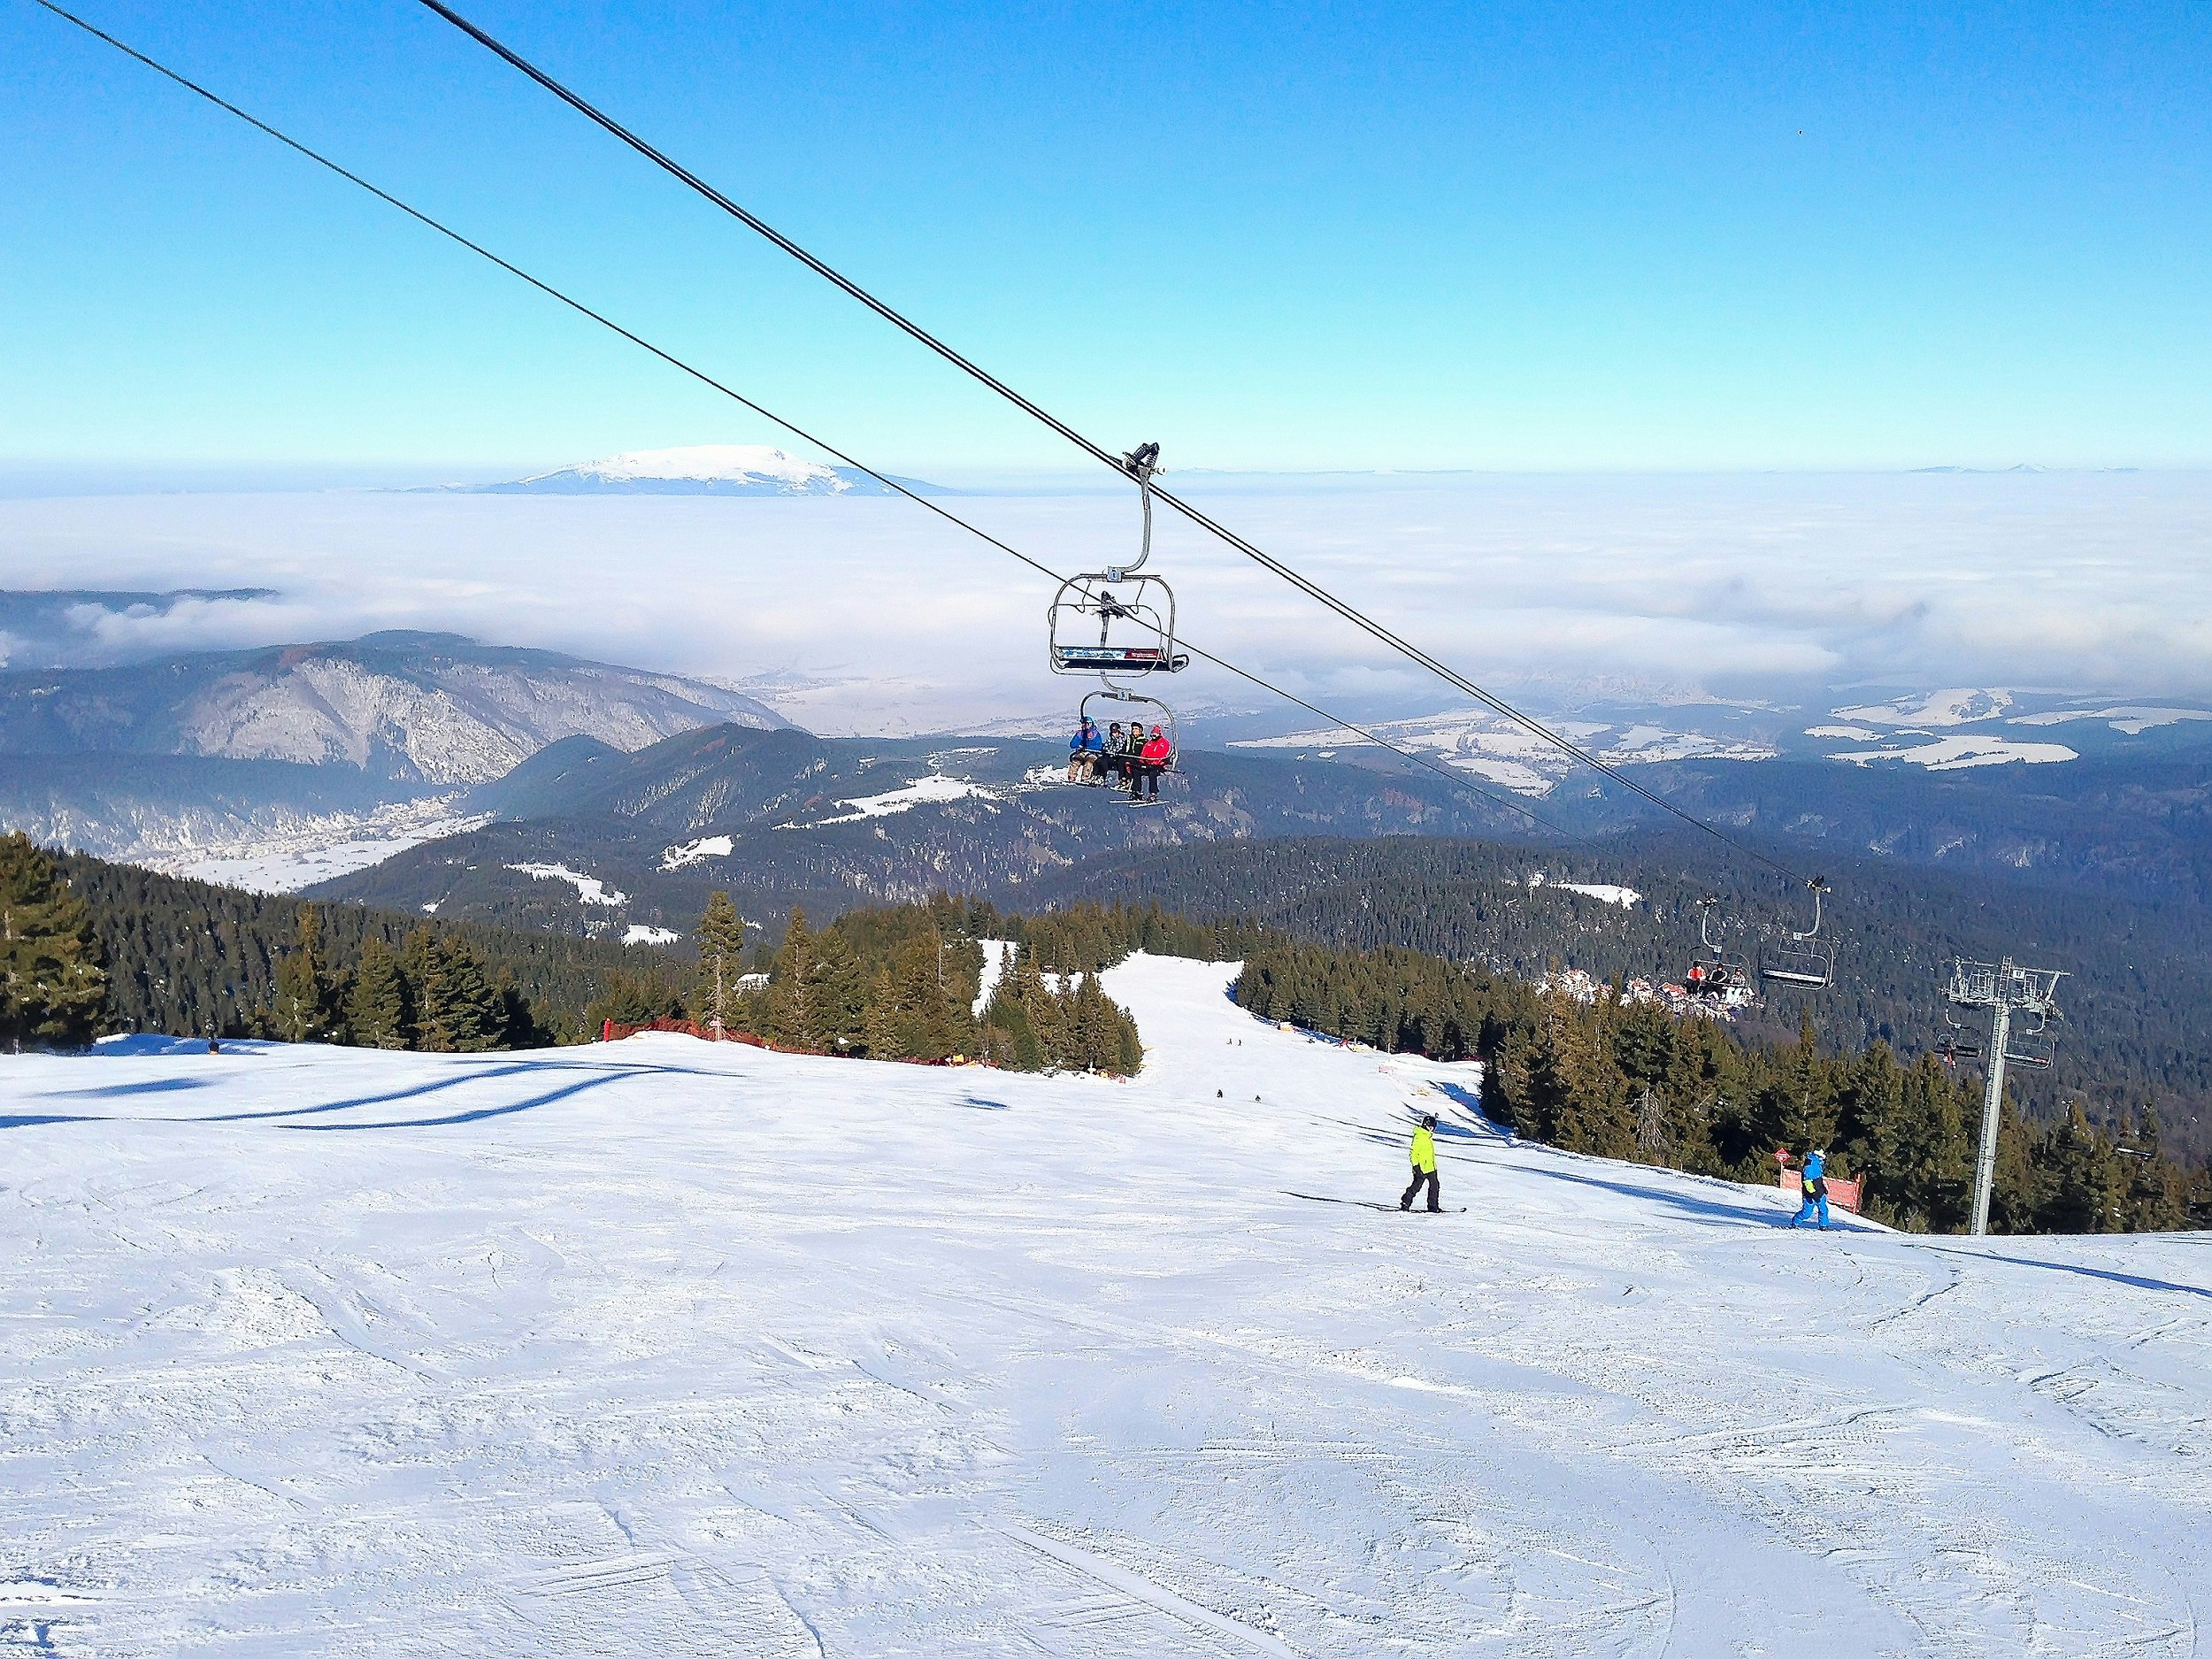 A ski slope covered in snow, with a chairlift passing overhead.